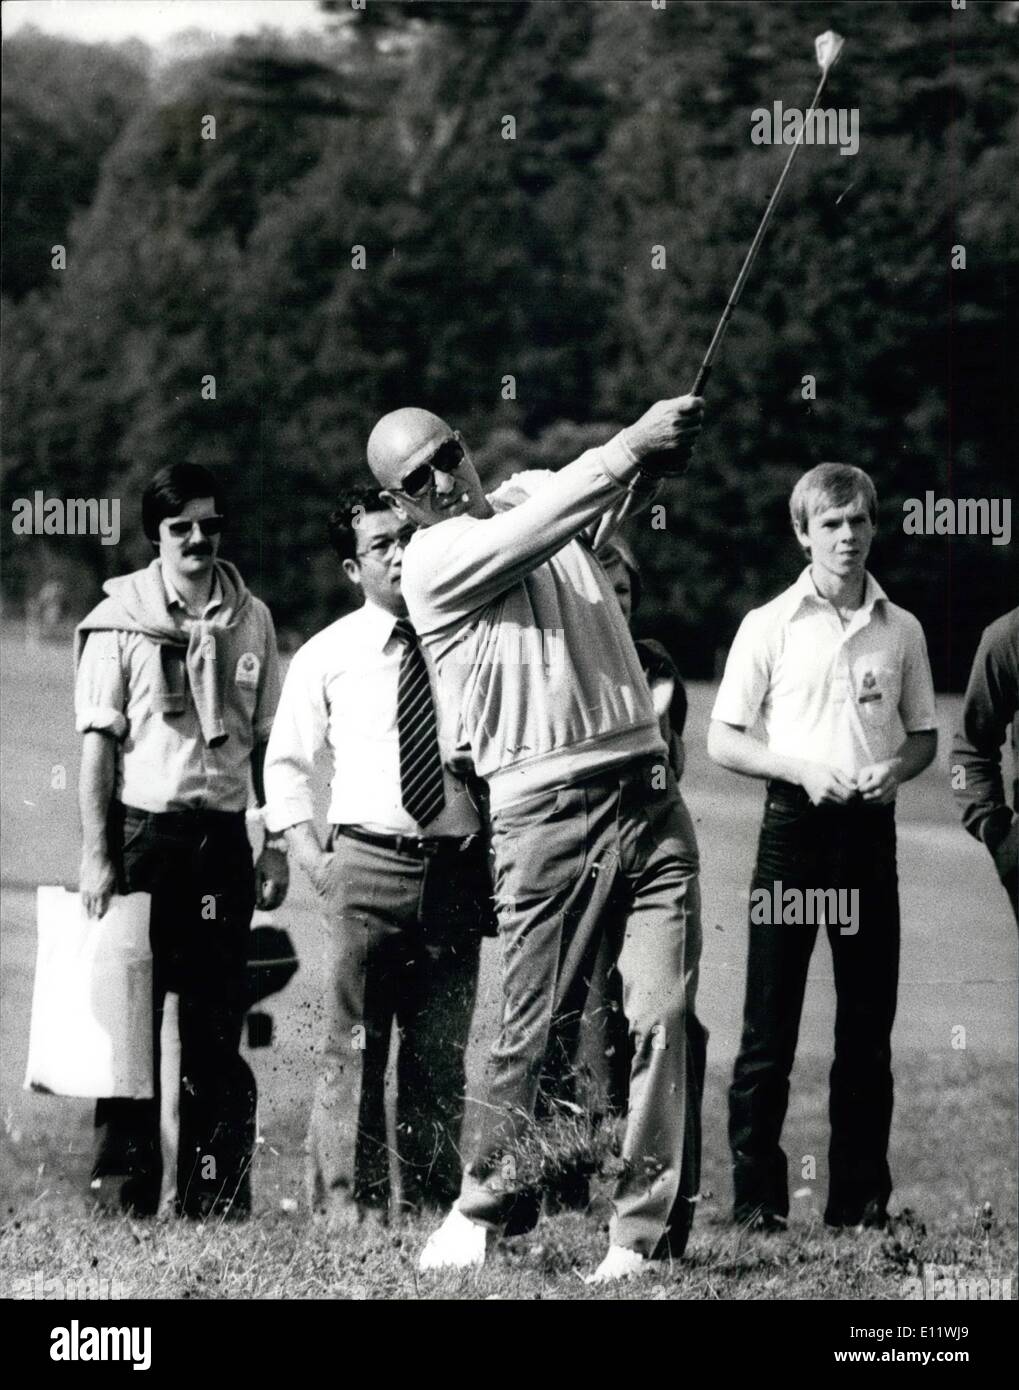 Sep. 09, 1980 - Bob Hopes British Classic At Epson. Photo Shows Telly Savalas seen Shooting out of the rough during the first round of the Bob Hope British Classic Golf Tournament at Epson Today. Stock Photo